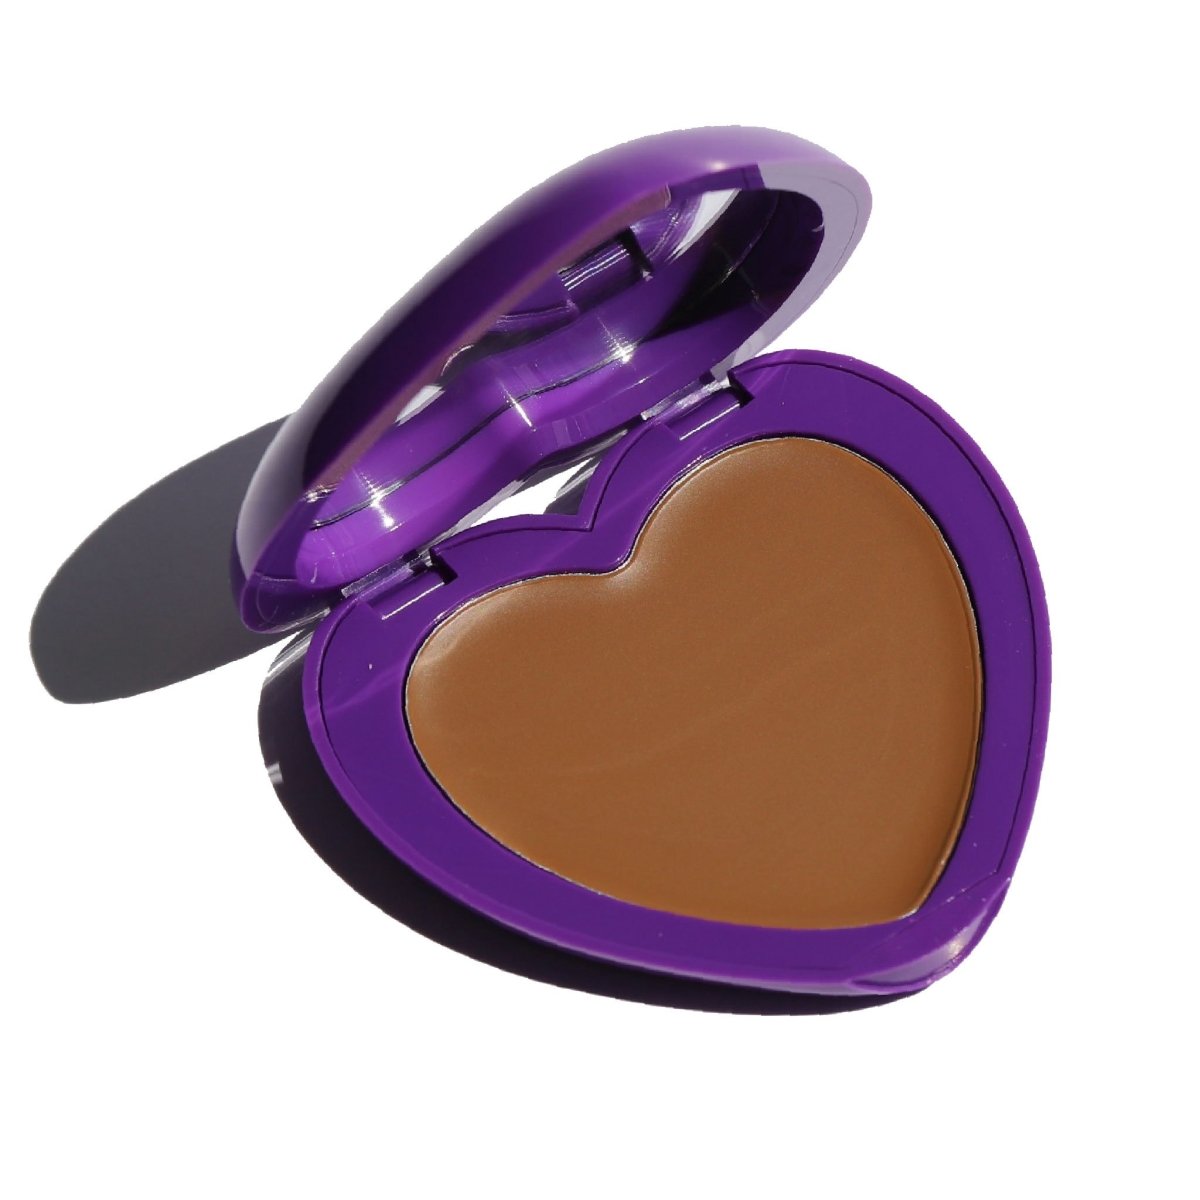 purple heart-shaped compact with mirror and brown pan - candy paint bronzer, cubby - half caked makeup